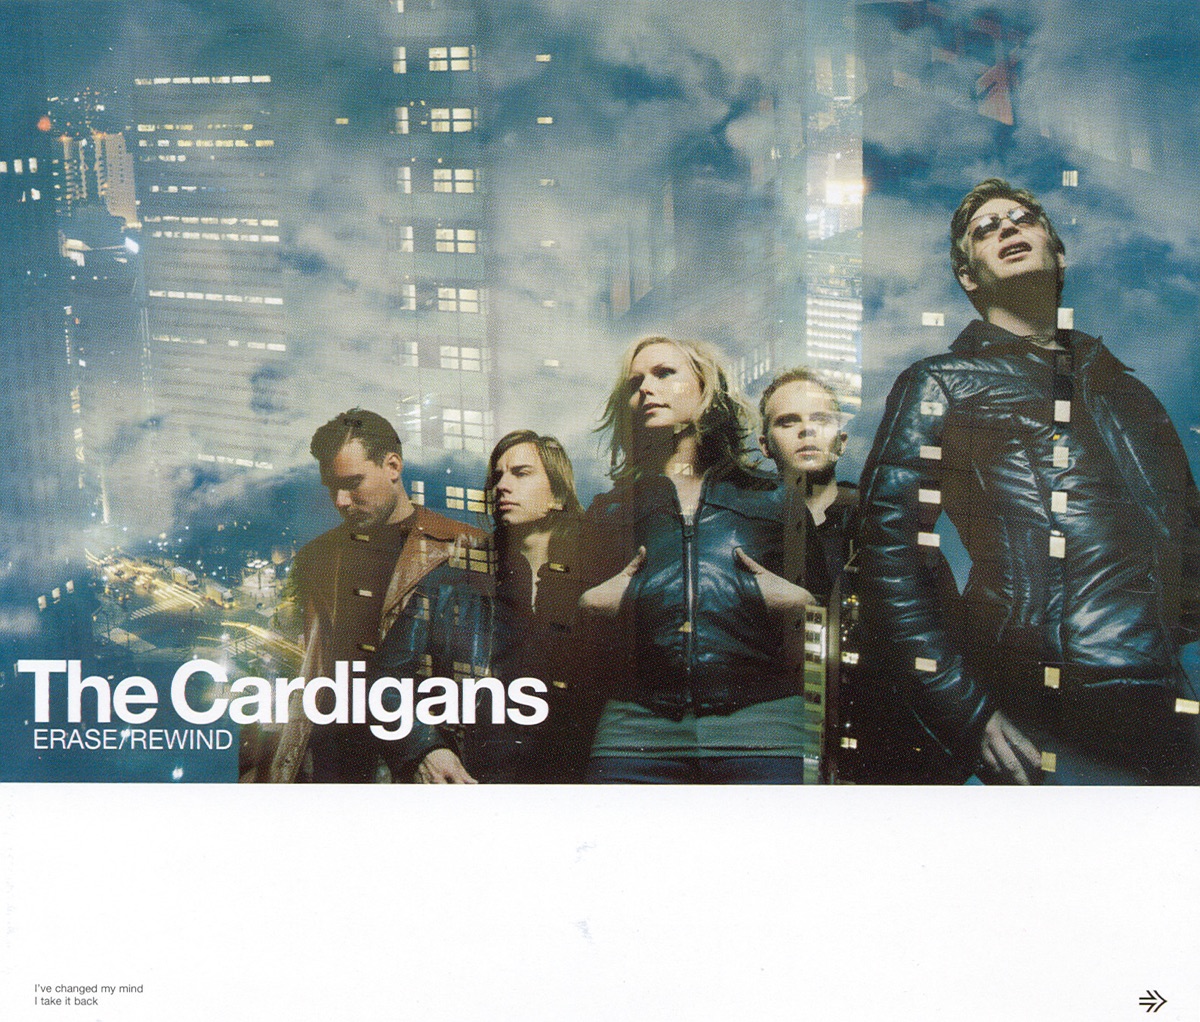 Best of the Cardigans by The Cardigans on Apple Music